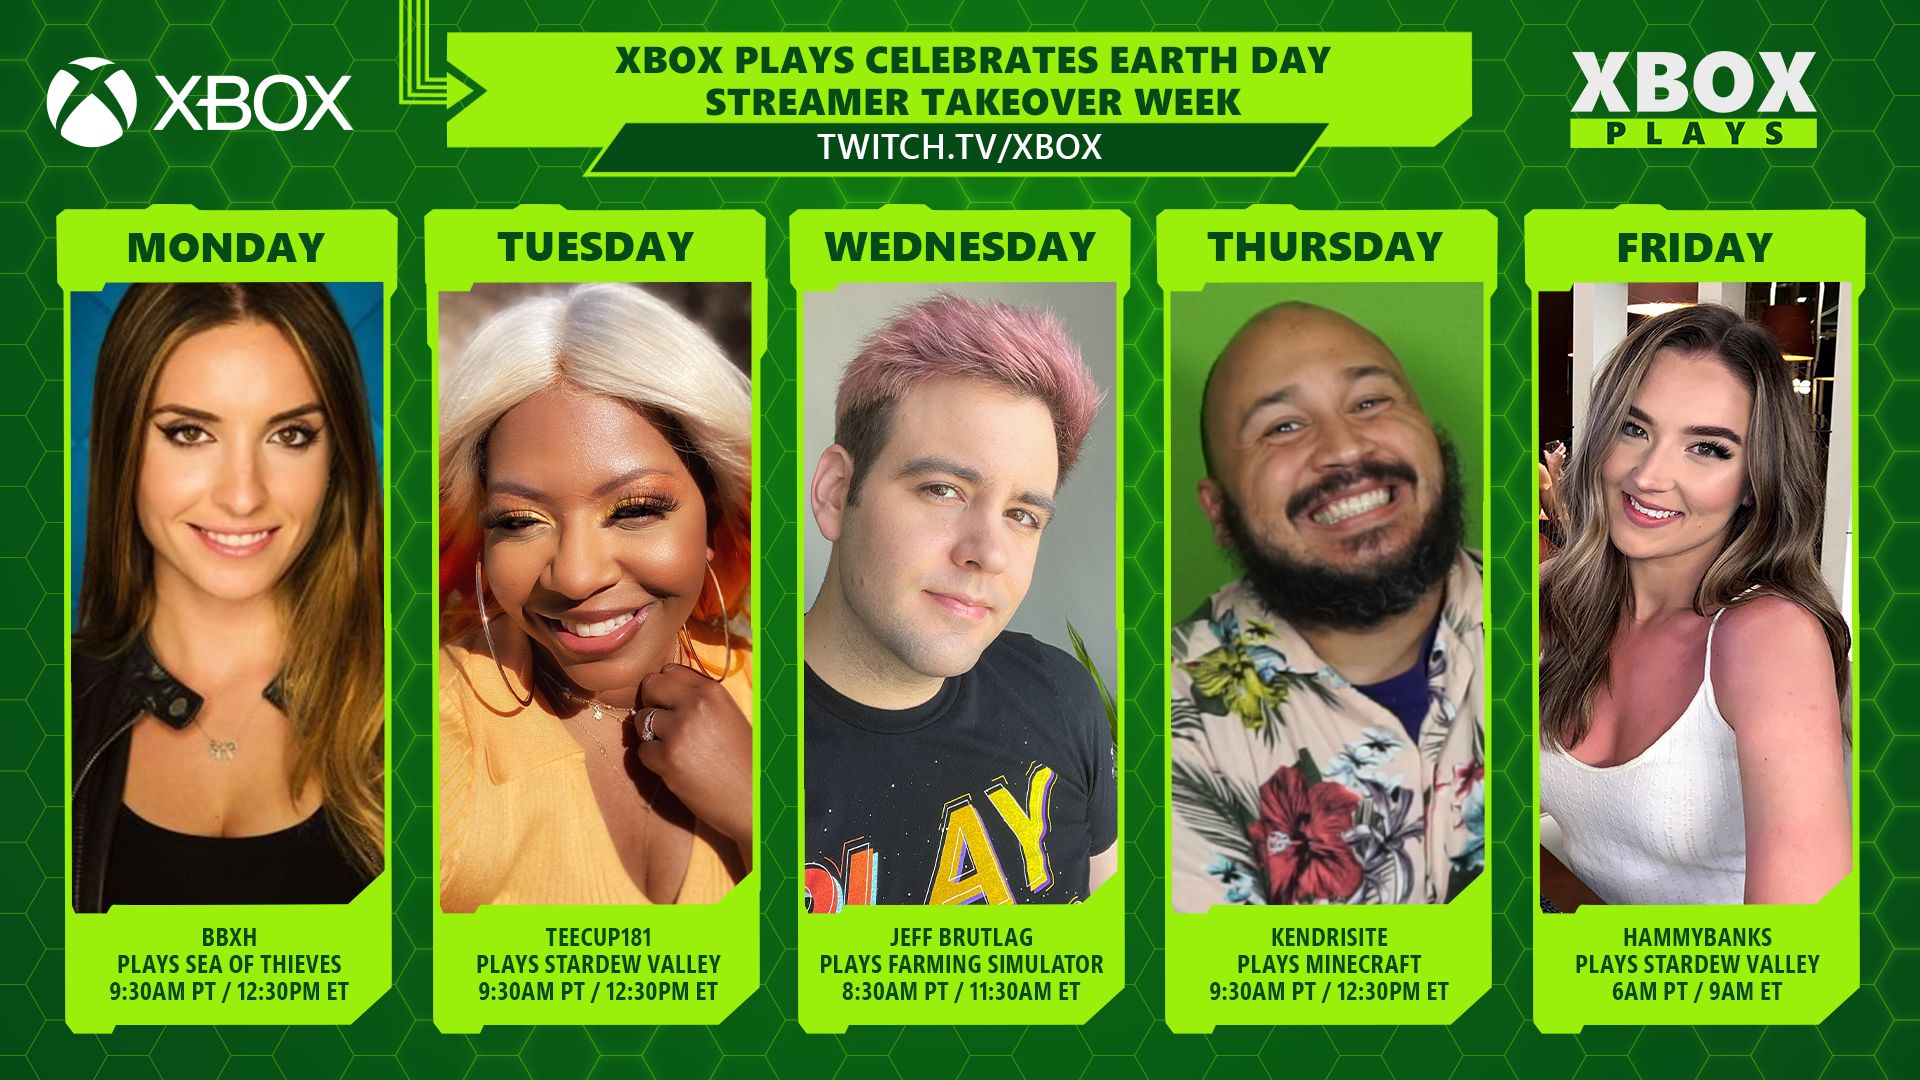 Xbox Plays celebrates Earth Day with streamer takeover week featuring BBXH, TEECUP181, JEFF BRUTLAG, KENDRISITE and HAMMYBANKS.